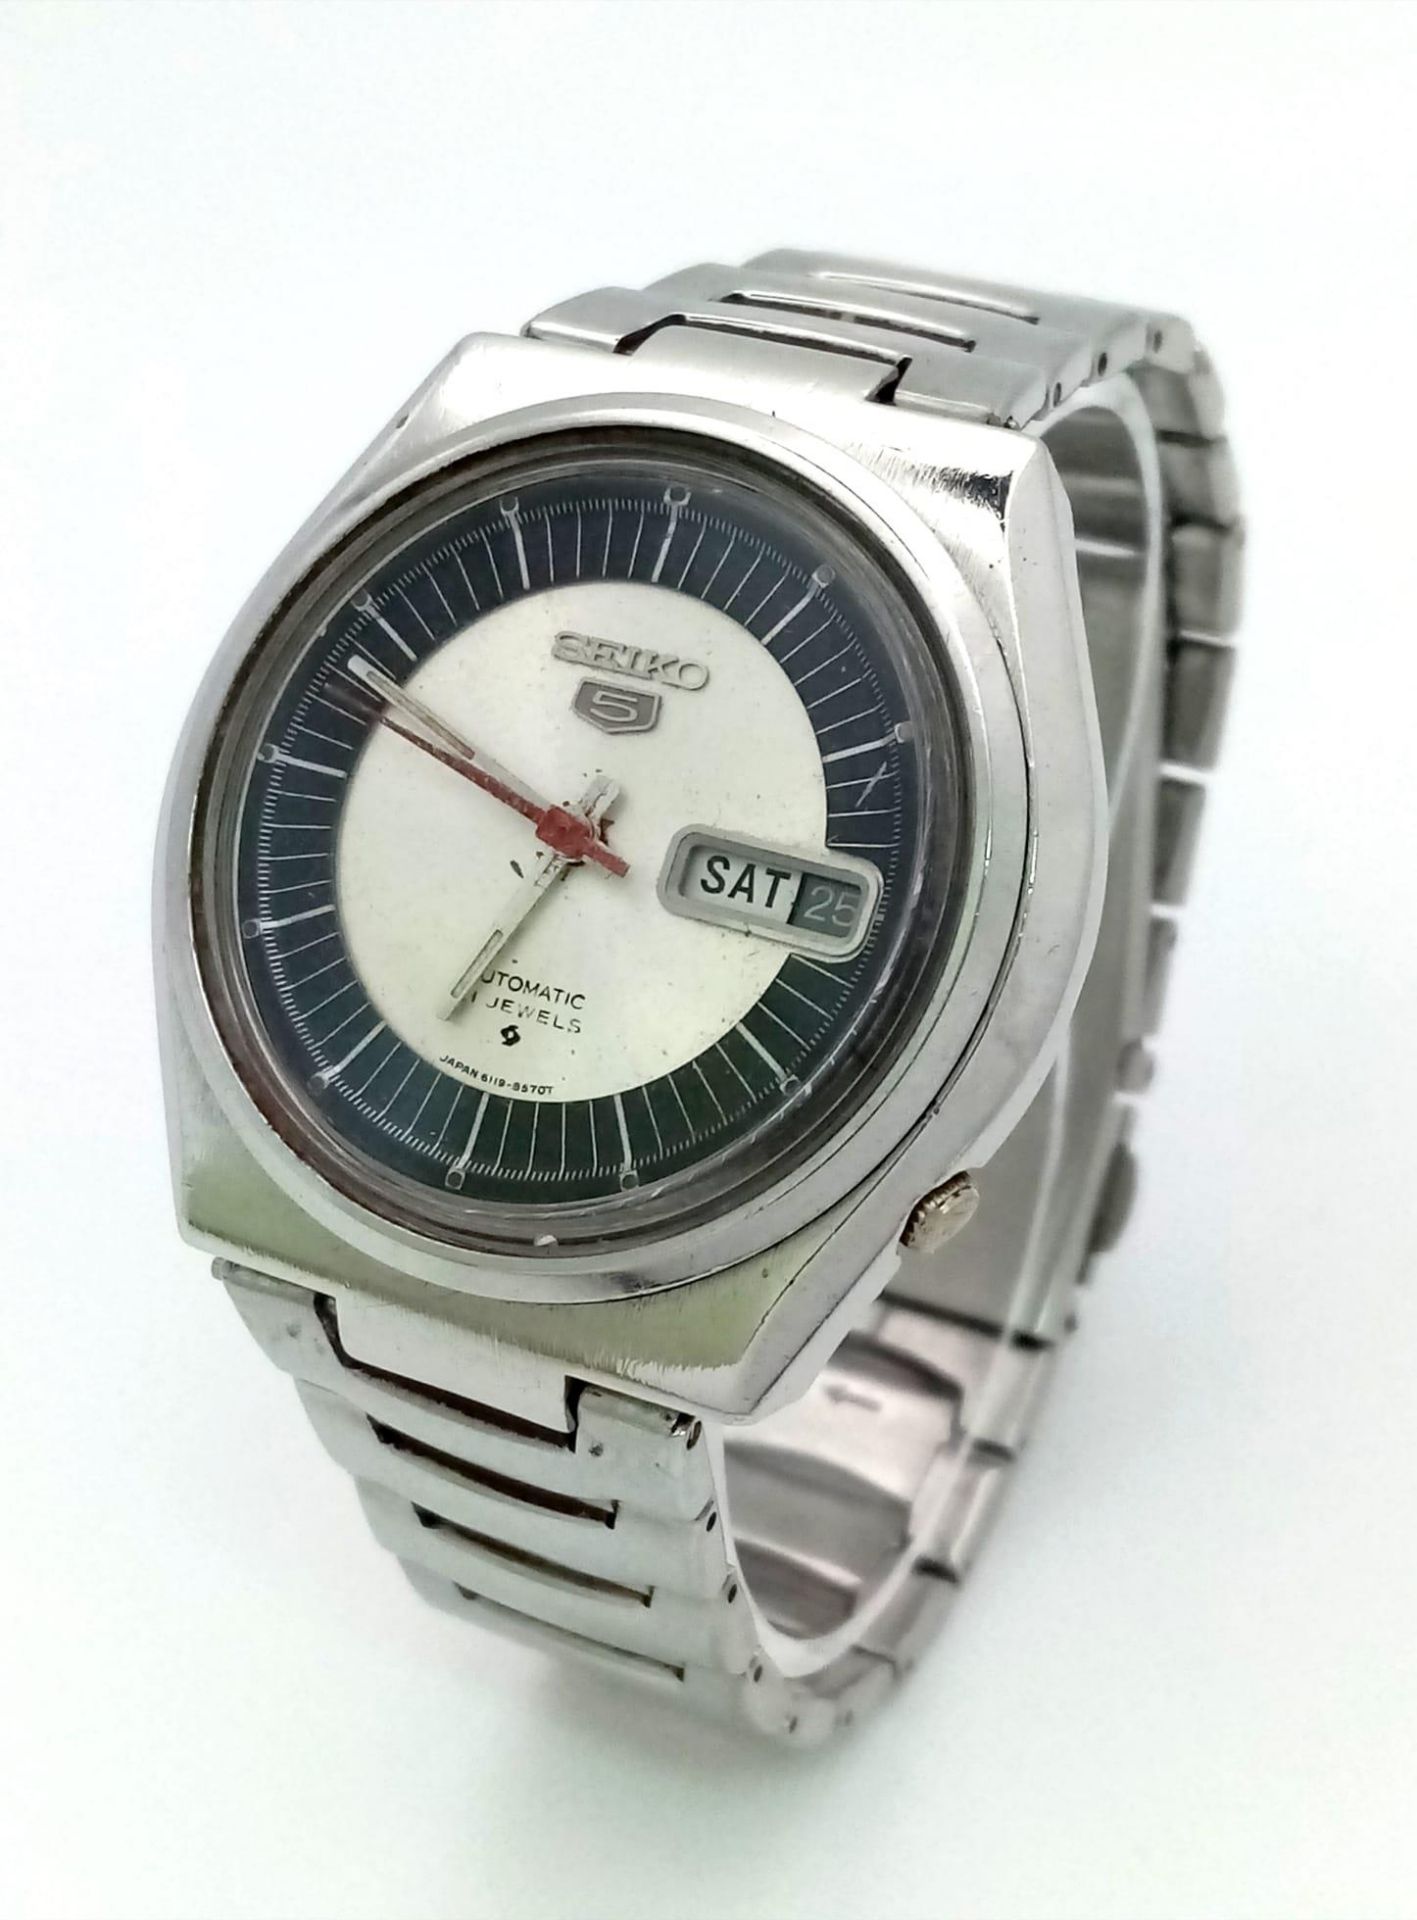 A Vintage Seiko 5 Automatic 21 Jewel Gents Watch. Stainless steel strap and case - 38mm. Silver